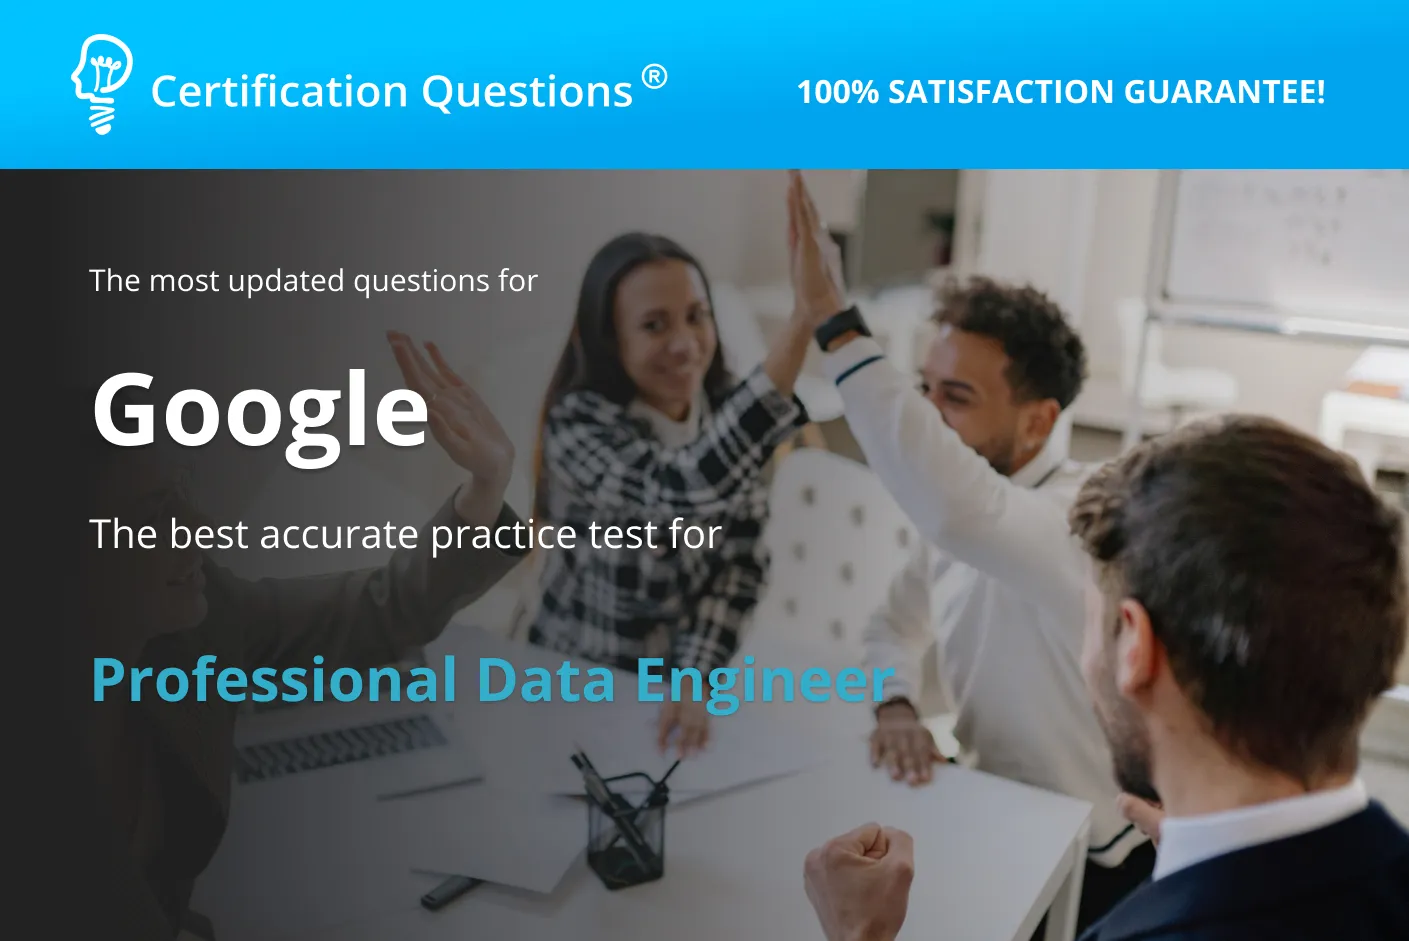 Here is the image for the guide of the google cloud professional data engineer exam questions.